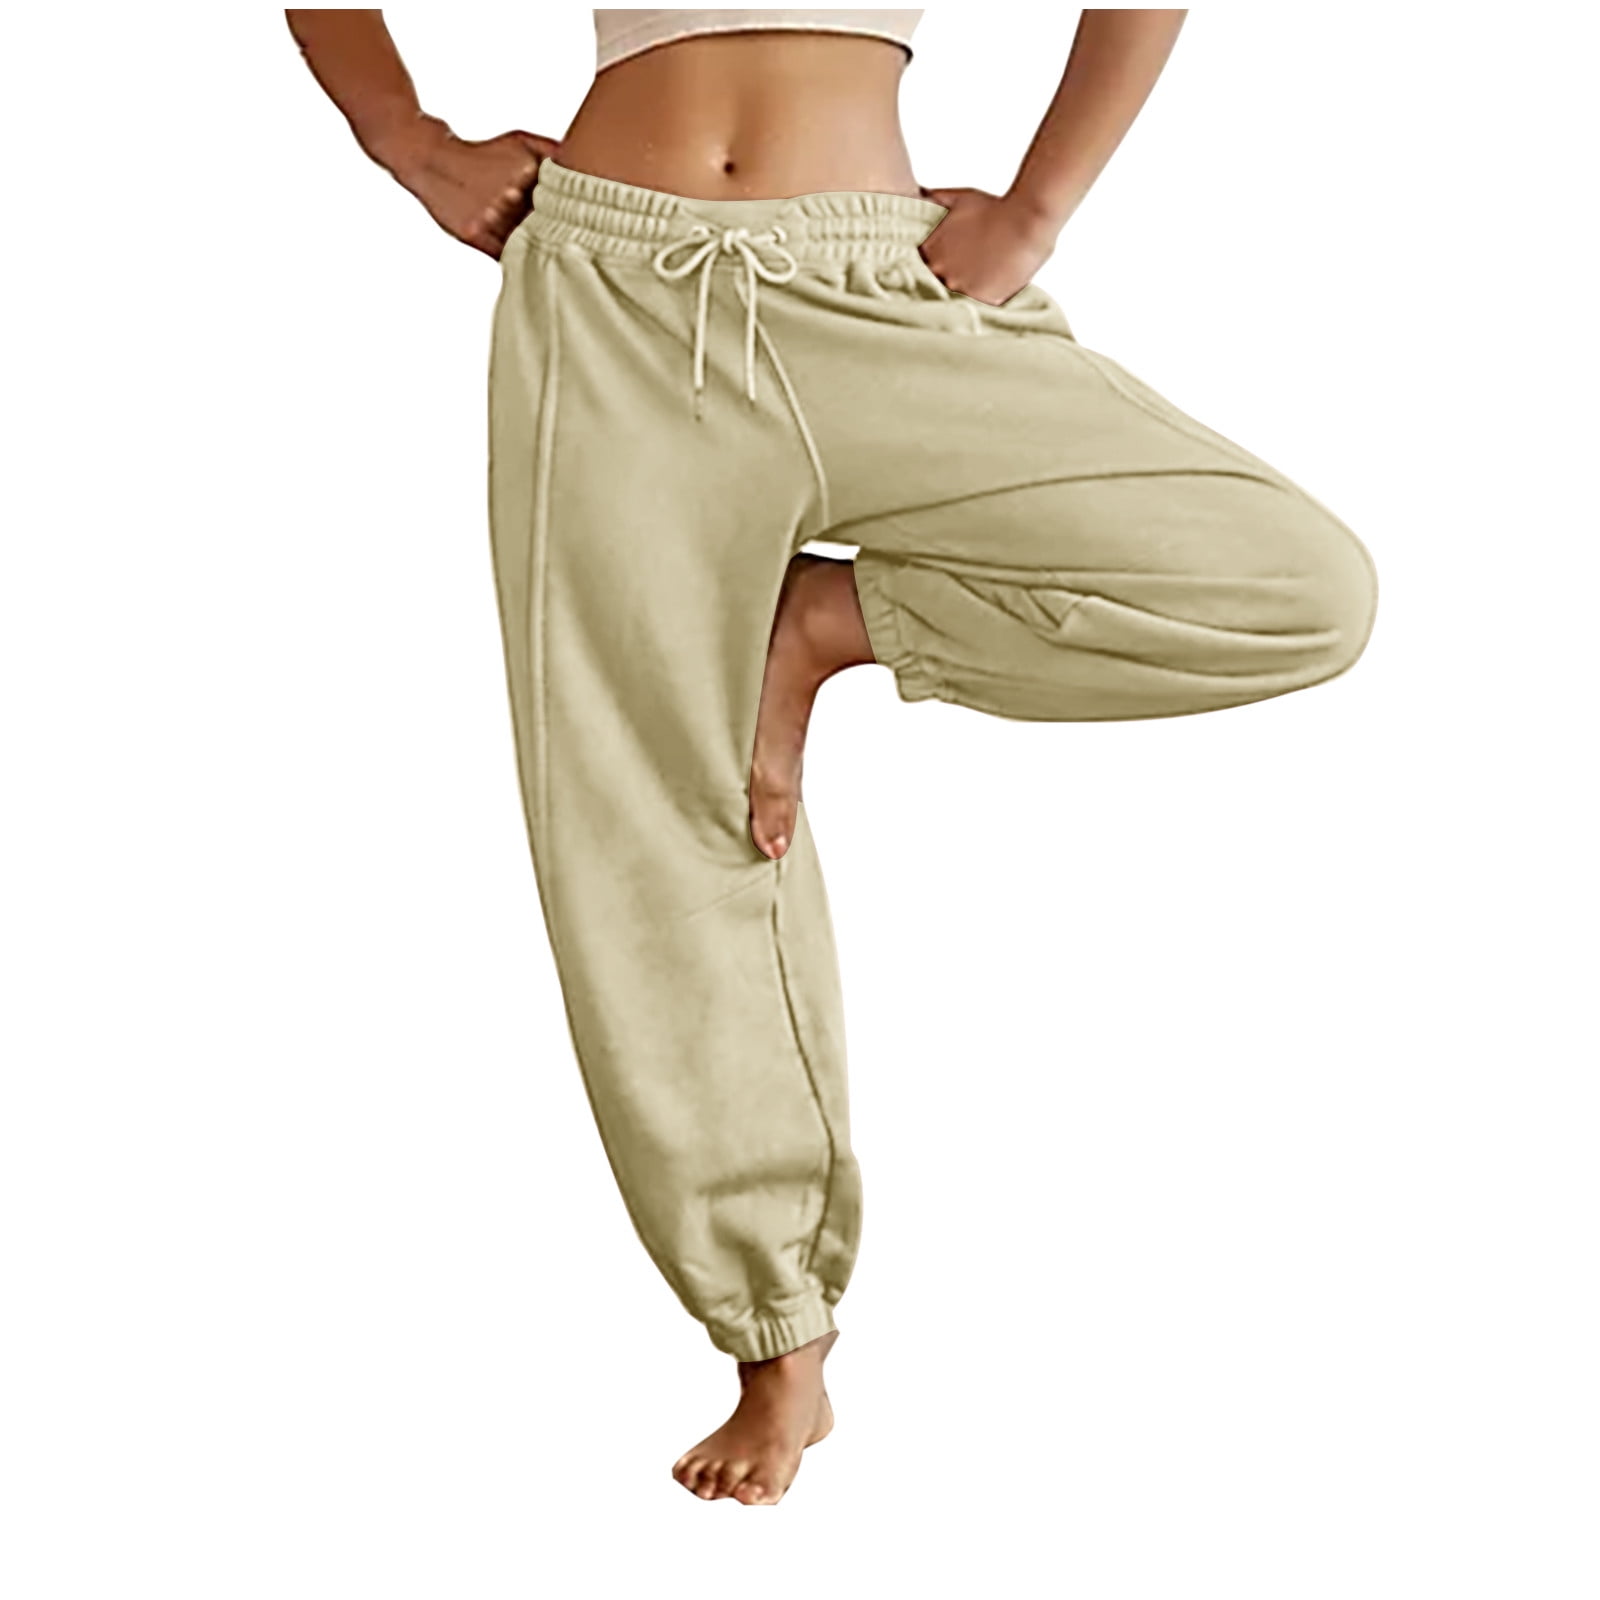 Hfyihgf Cinch Bottom Jogger Sweatpants for Women High Waist Drawstring  Baggy Pants Casual Workout Running Lounge Trousers with Pockets Beige S 